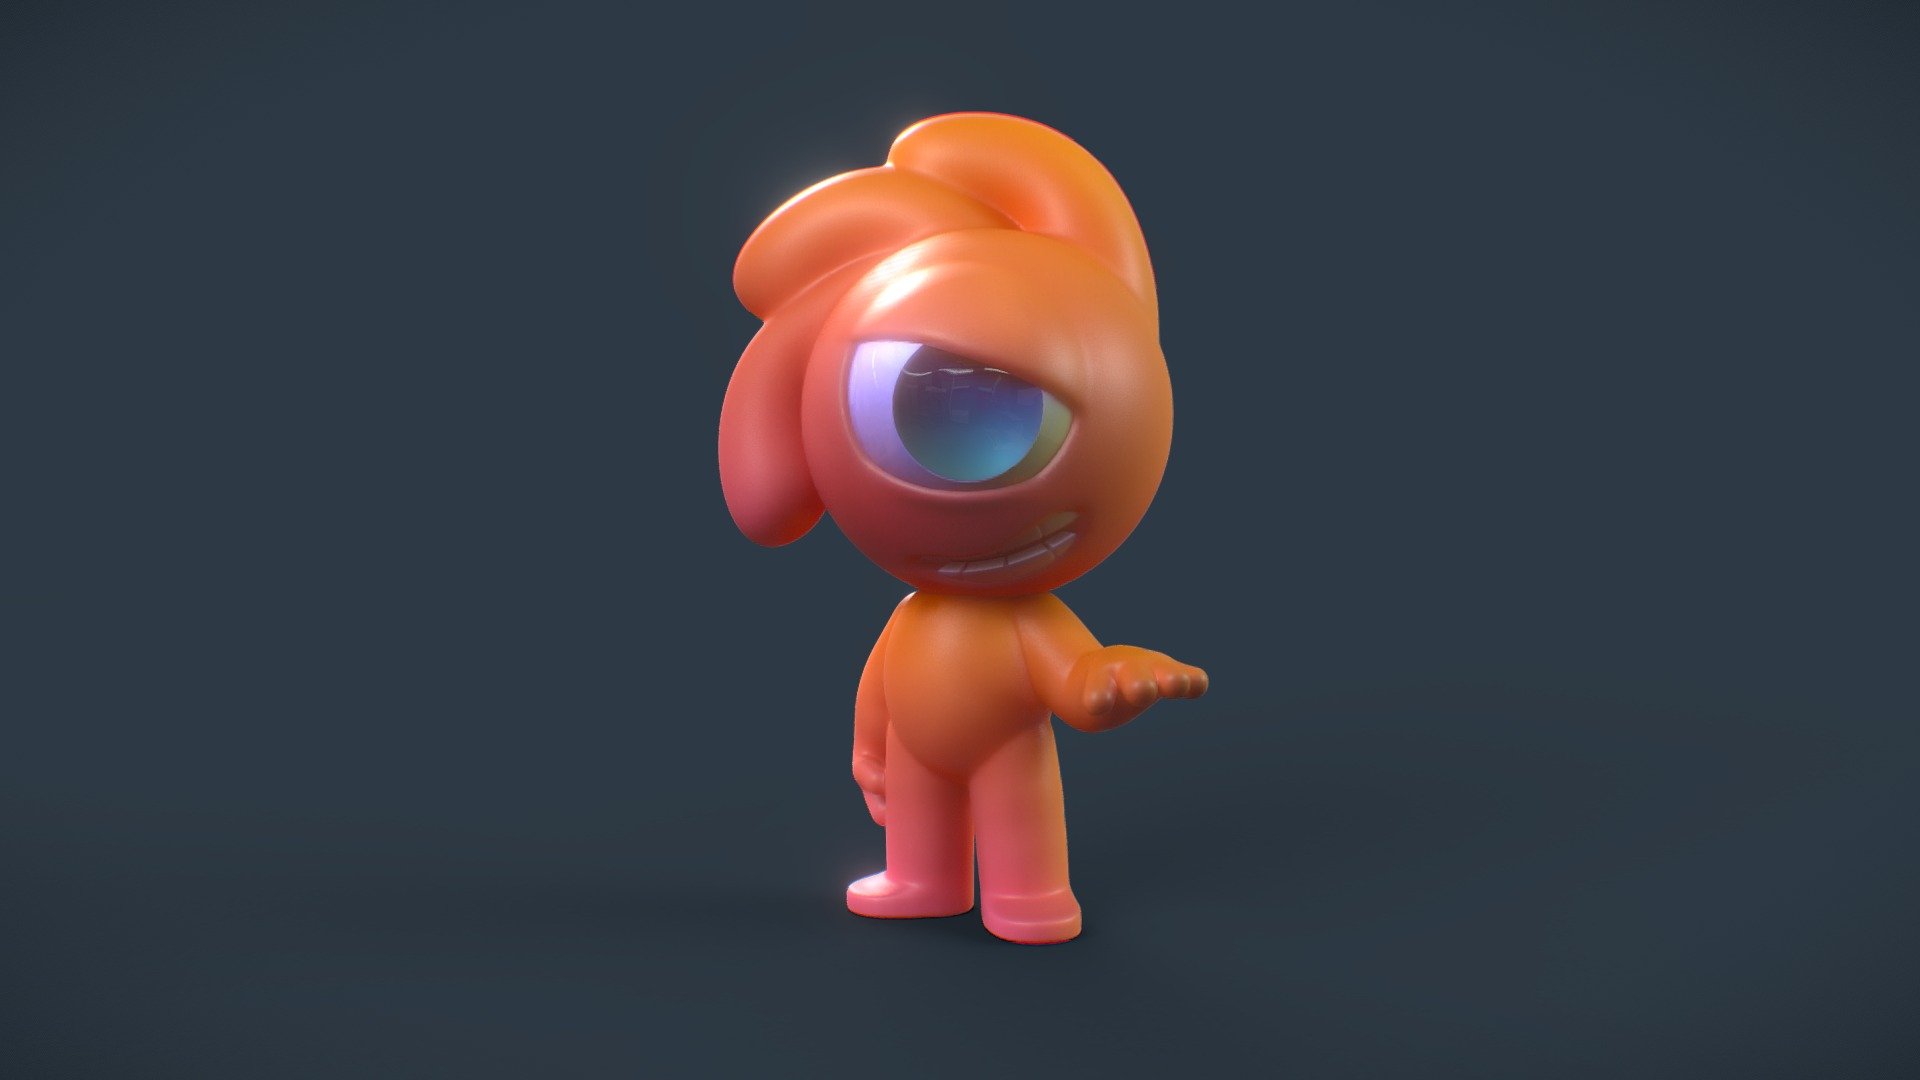 Realized for the needs of a tutorial introduction on Youtube, this Mascot is inspired by the official logo of the Blender 3D software 3d model